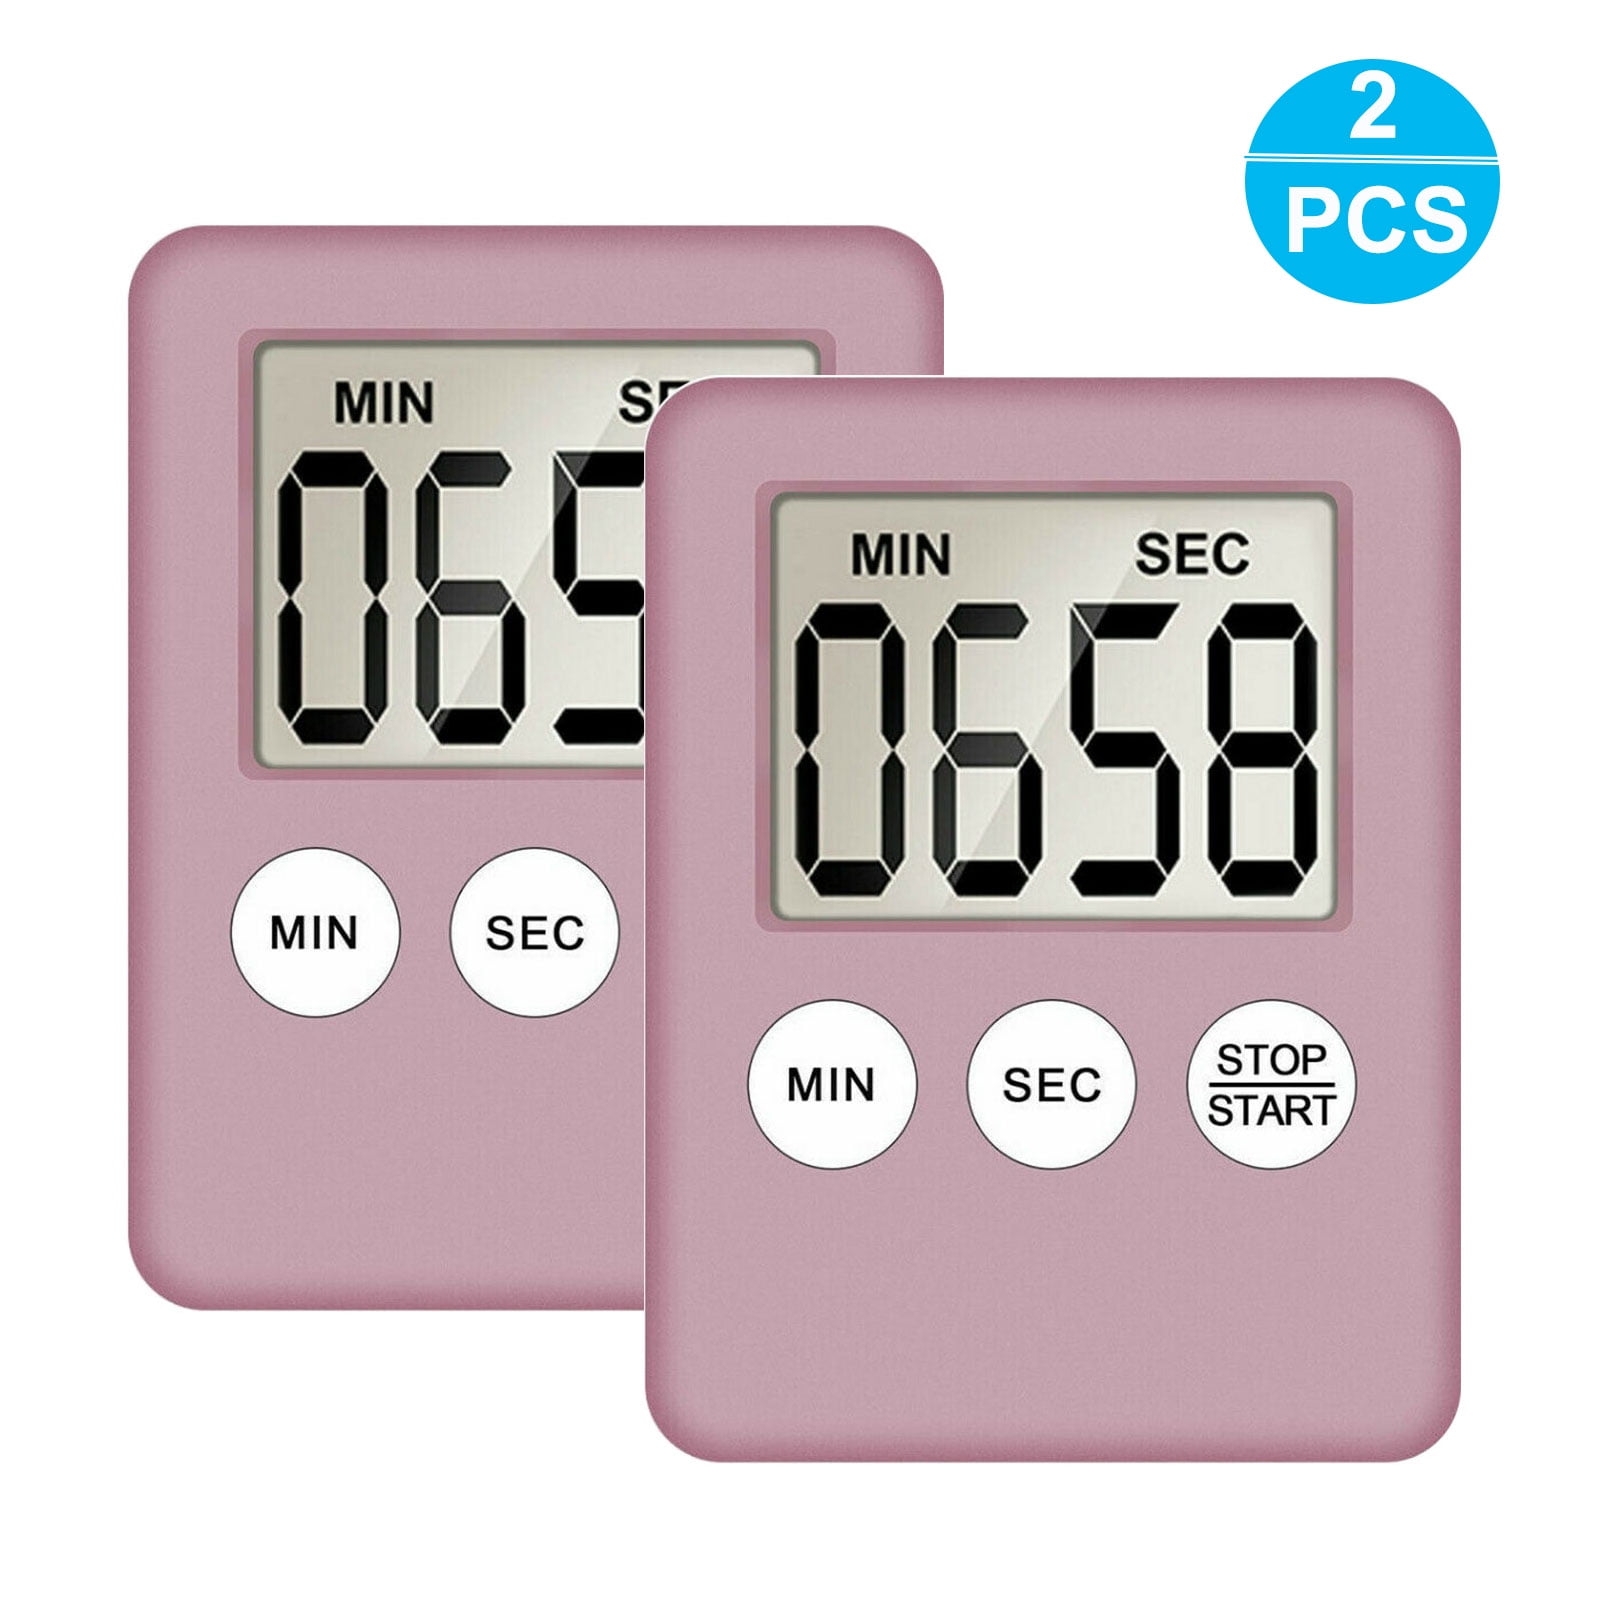 1 pc New Large Lcd Kitchen Cooking Timer Count Down Up Clock Loud Alarm Magnetic